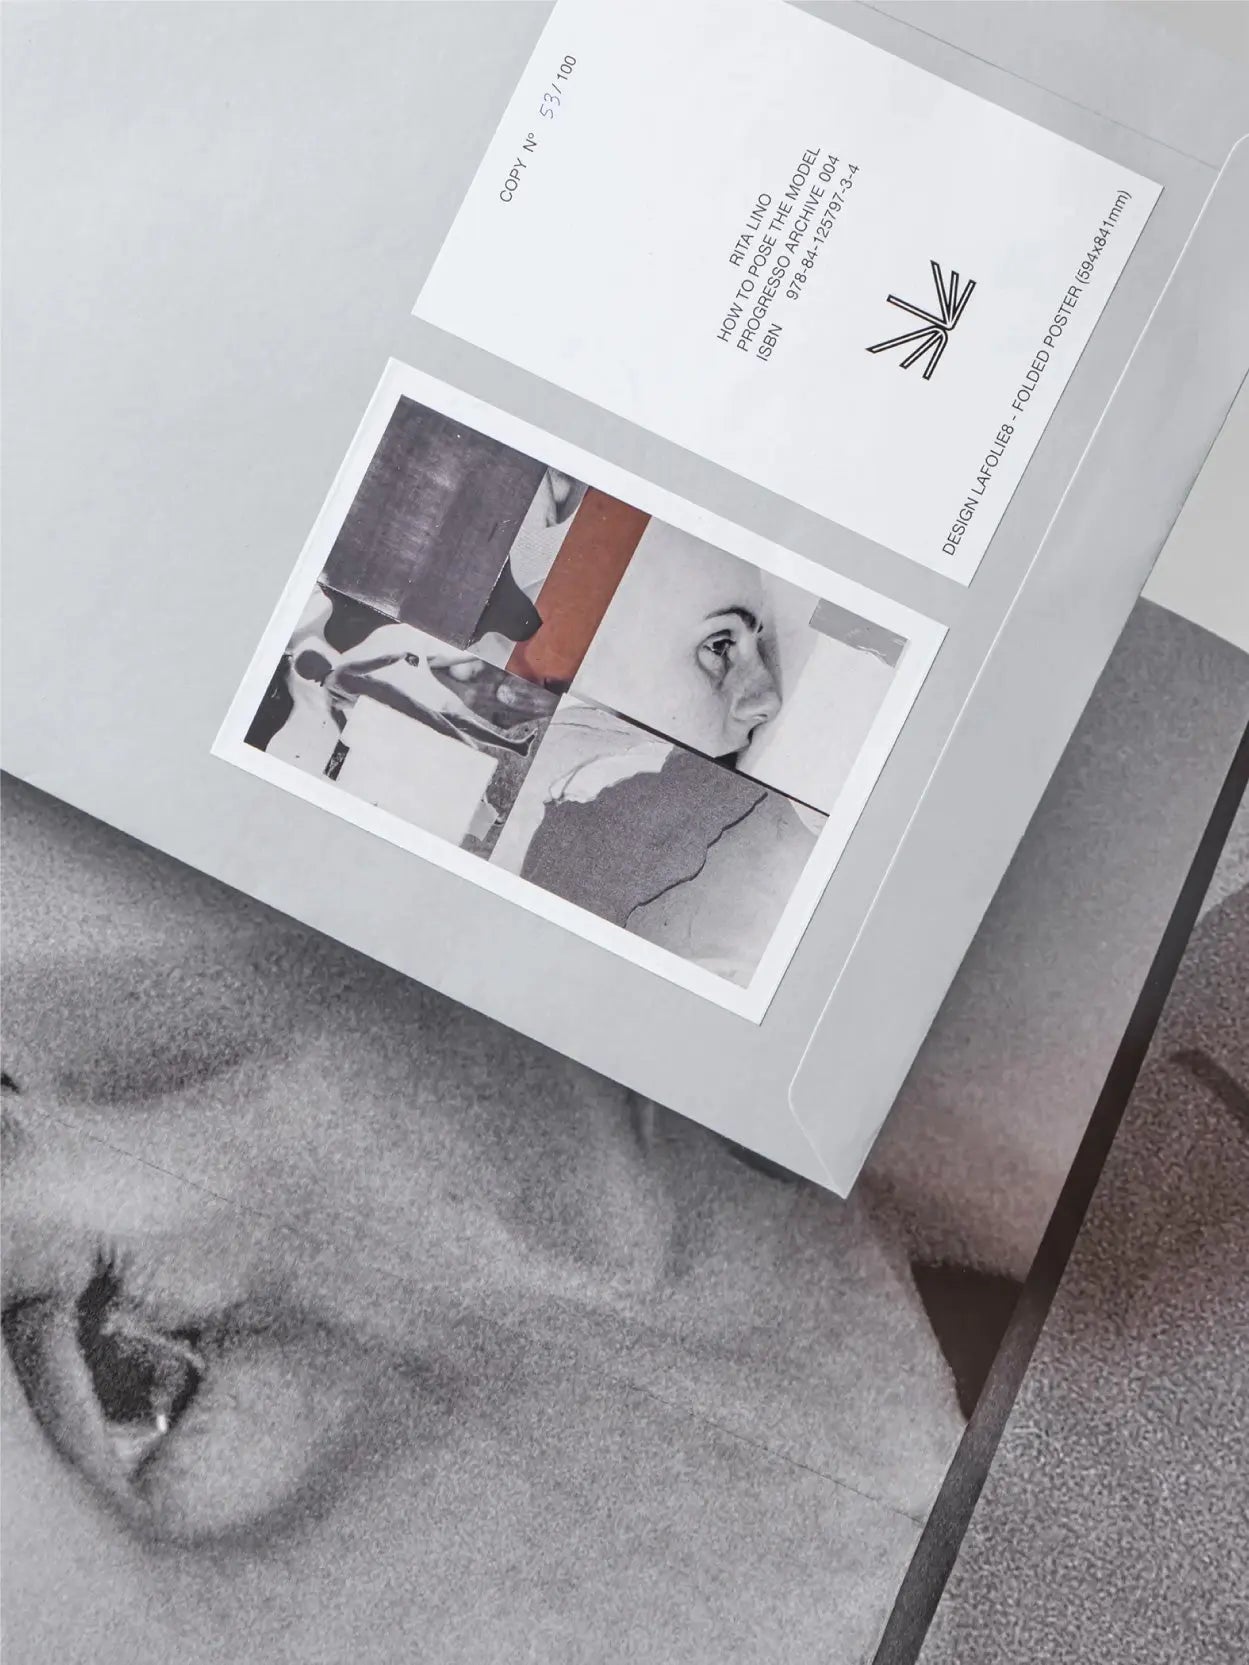 A gray folder on the left side with two black-and-white photos and text on the front. Next to it on the right is a black-and-white photograph featuring an abstract figure of a person in motion. This elegant display might be found in a chic store like Bassalstore in Barcelona, such as "How to Pose the Model by Rita Lino" by Progresso.